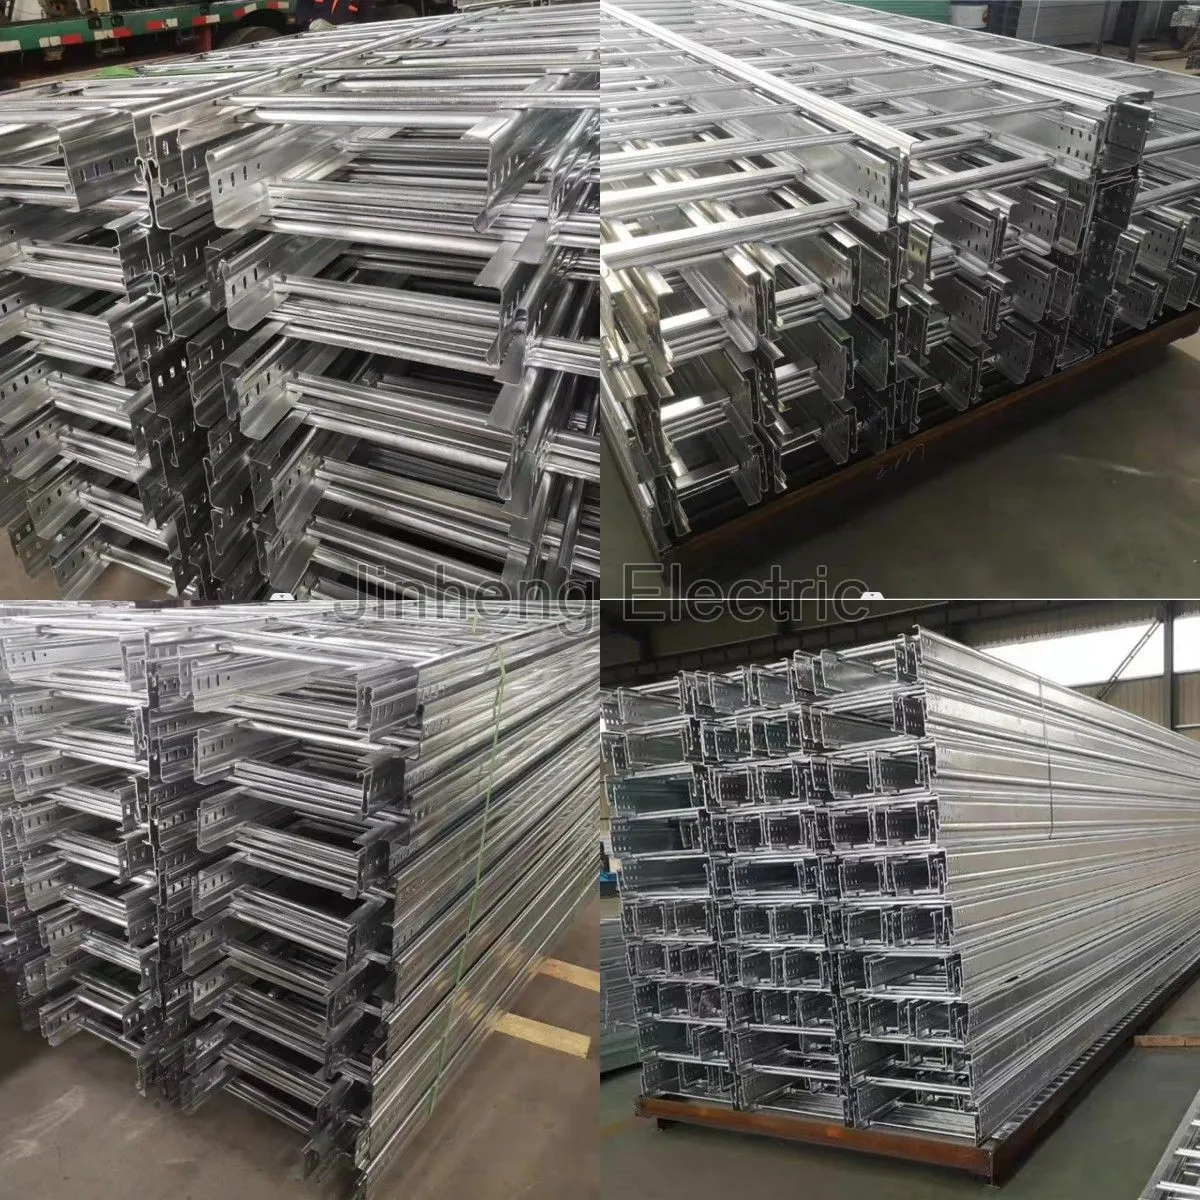 Outdoor hot dip galvanized steel cable ladder